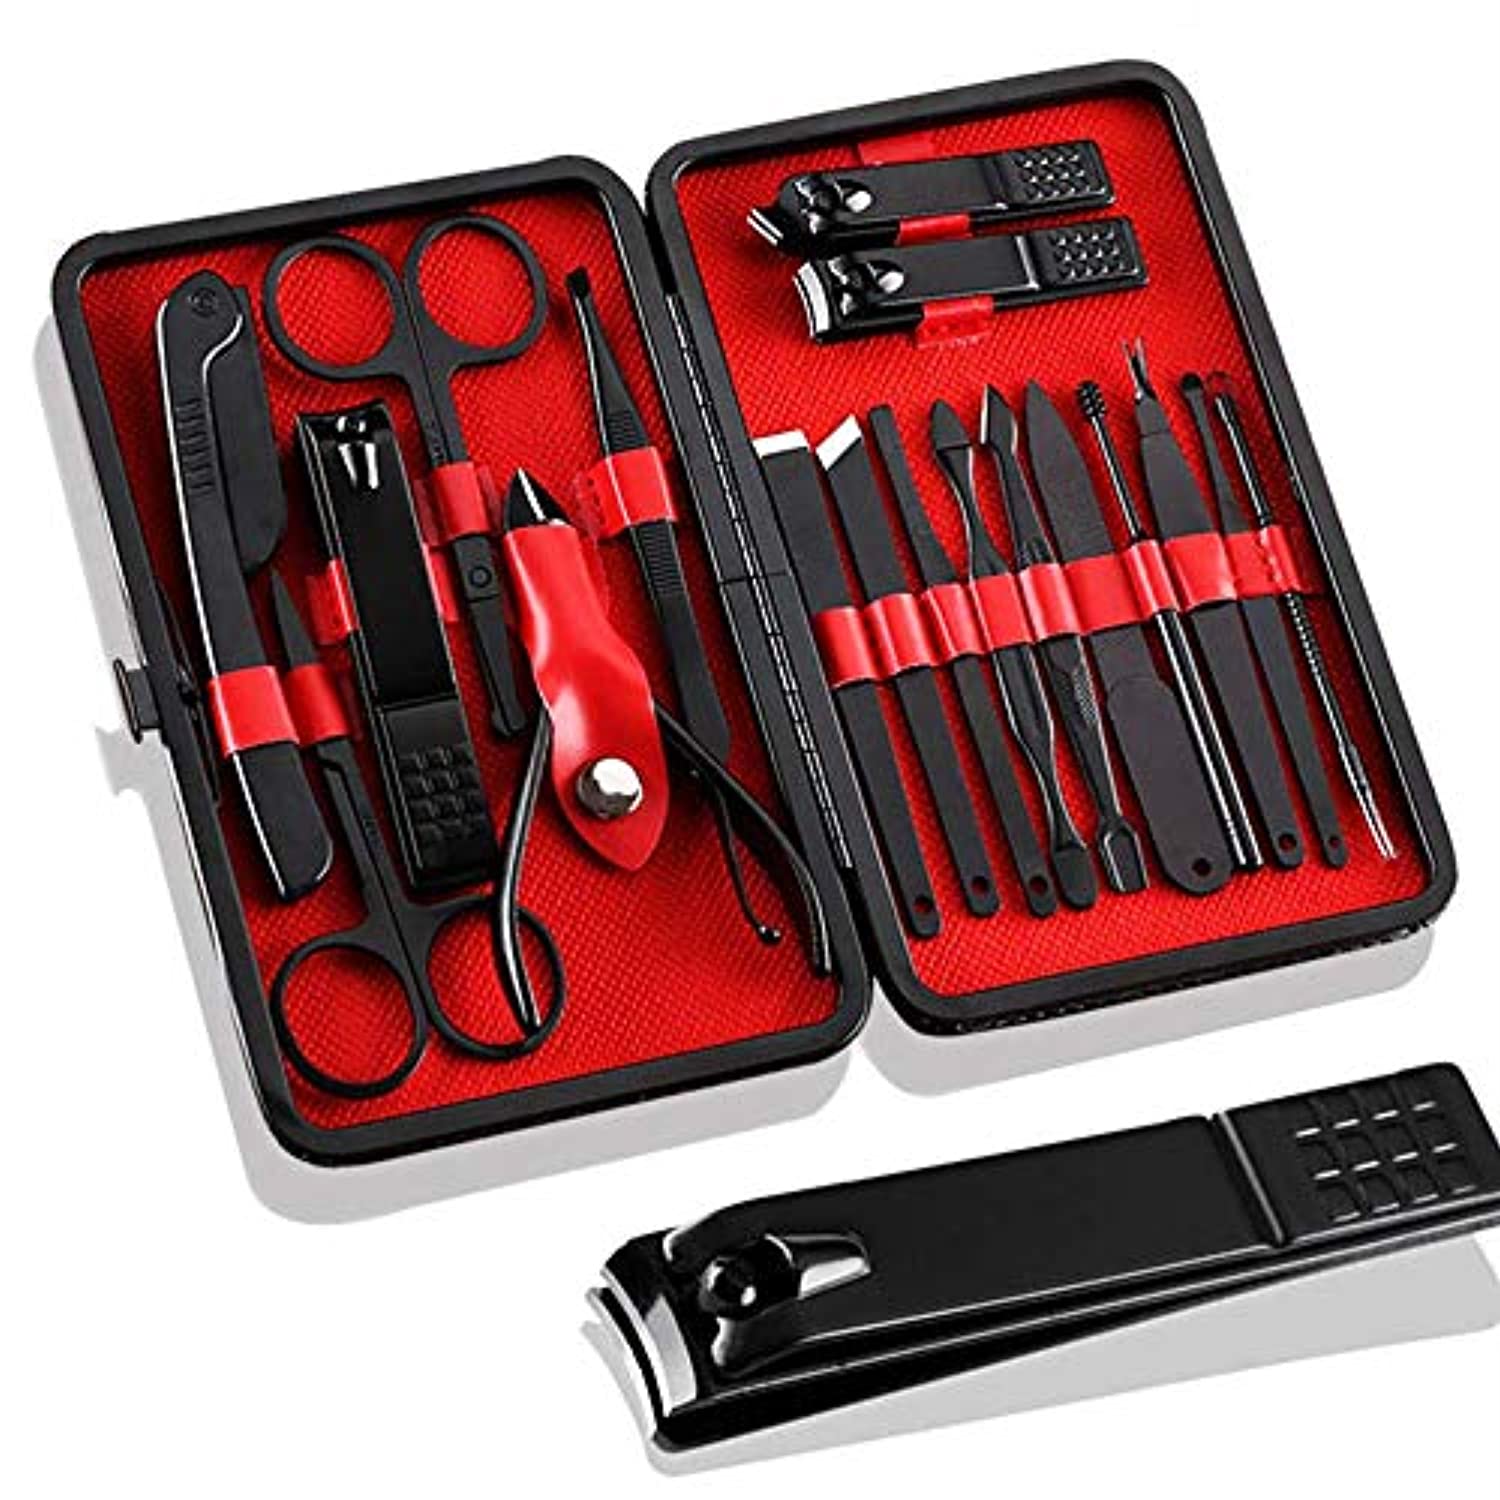 Manicure Set 18 in 1 Nail Clippers Set Stainless Steel Manicure Set